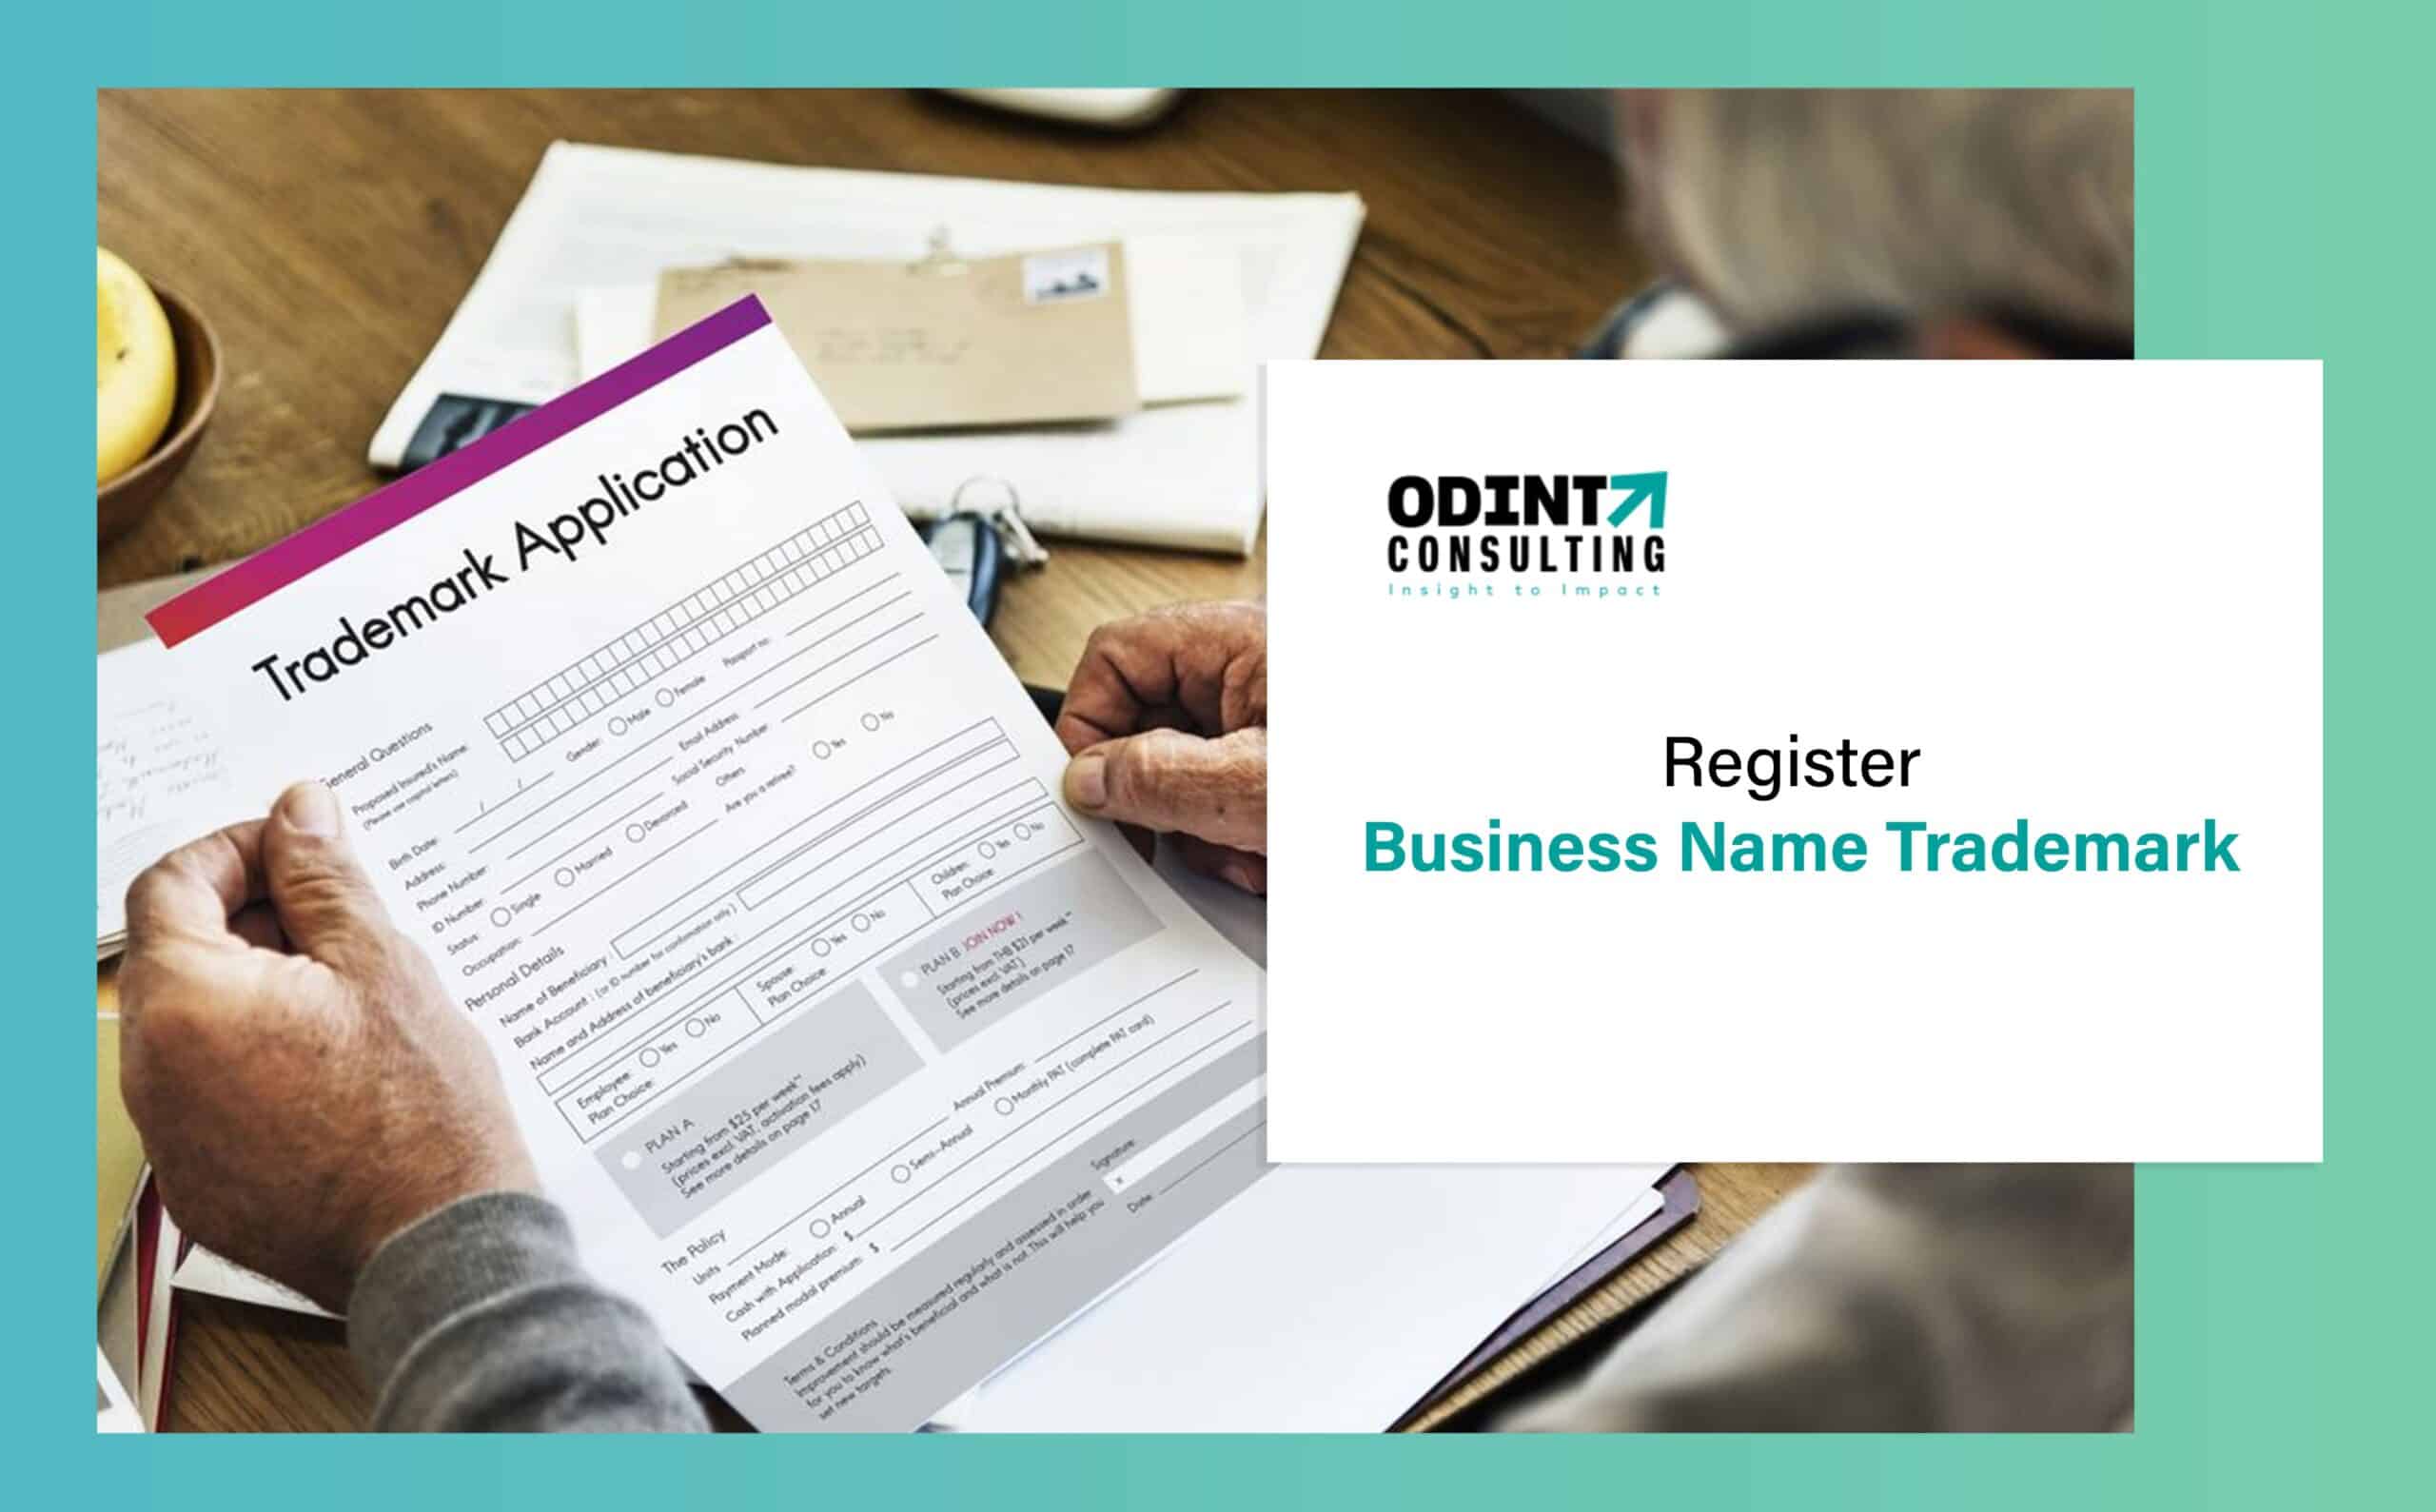 Register Your Business Name Trademark: Significance, Procedure & Alternatives